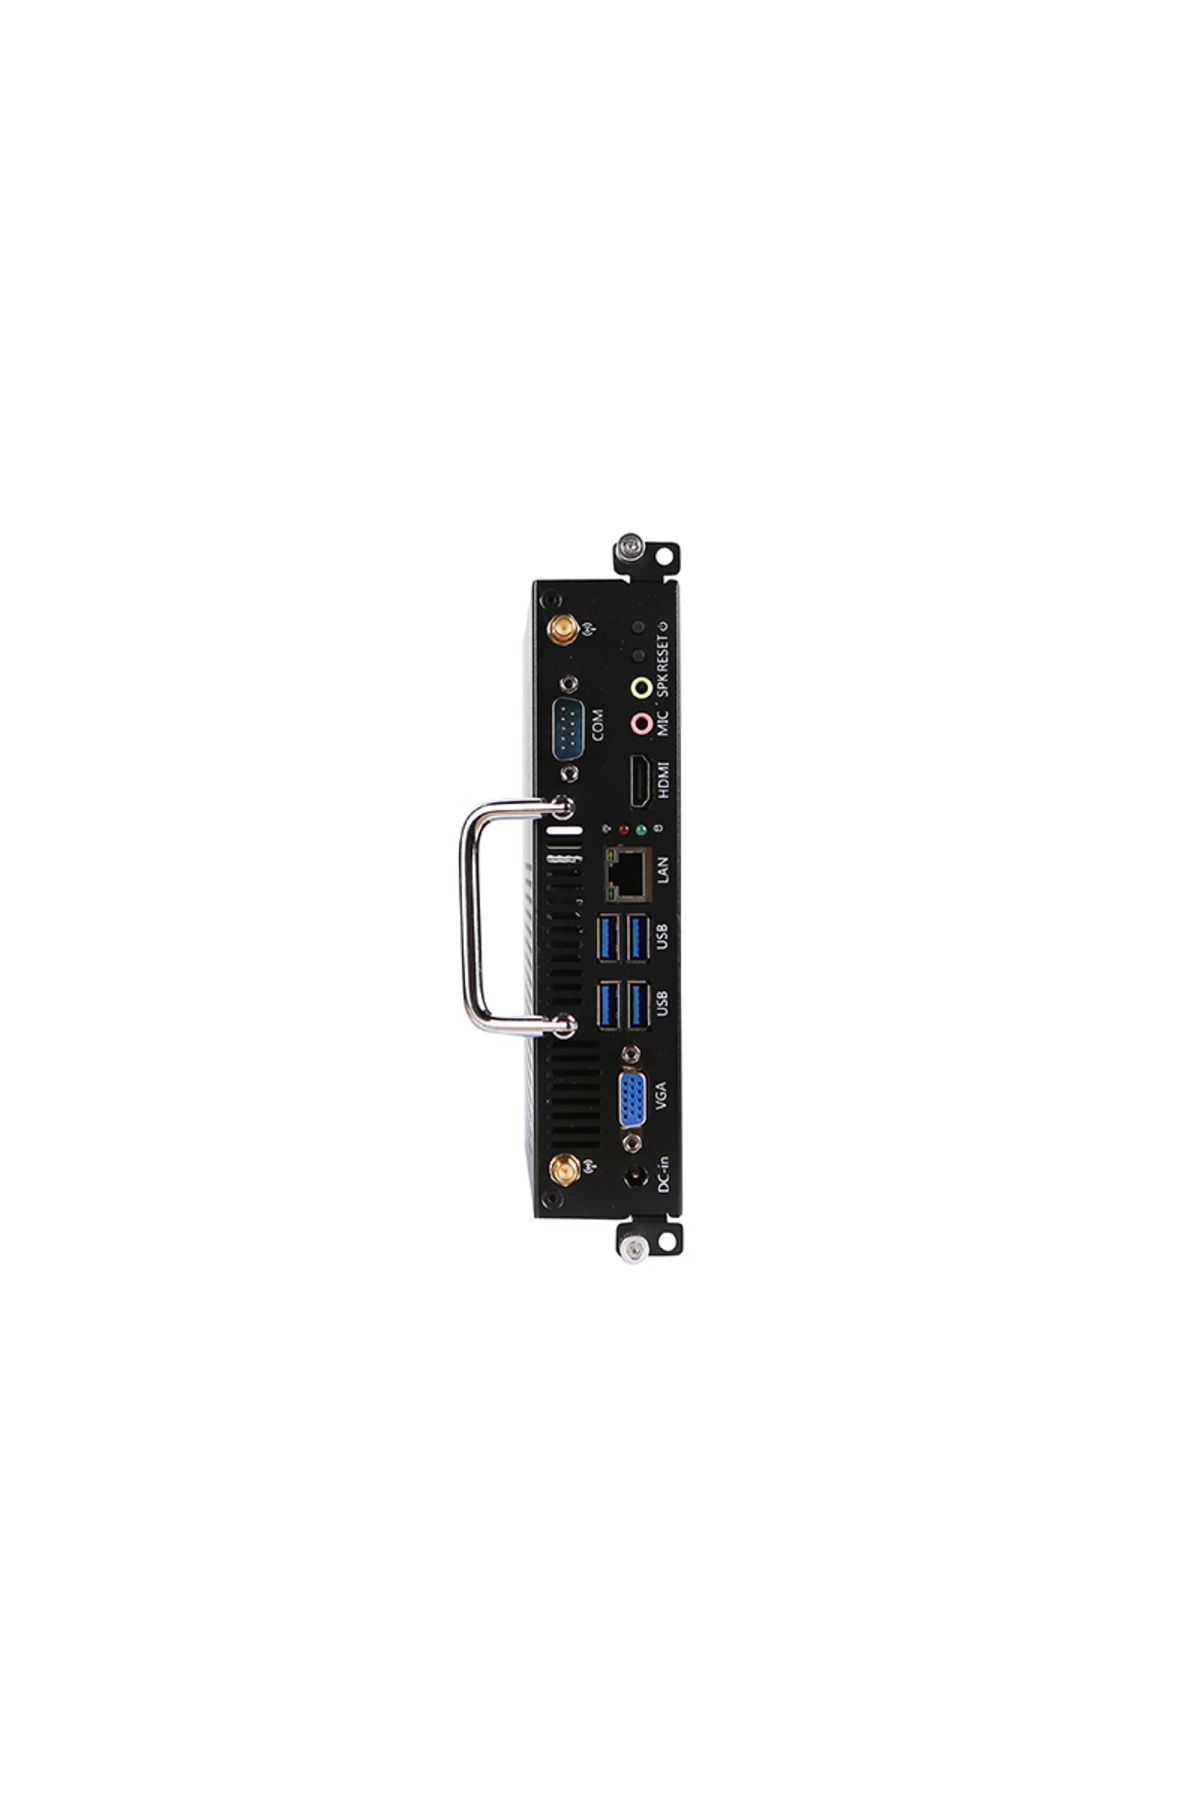 HNC TOUCH TECHNOLOGY Mini OPS PC